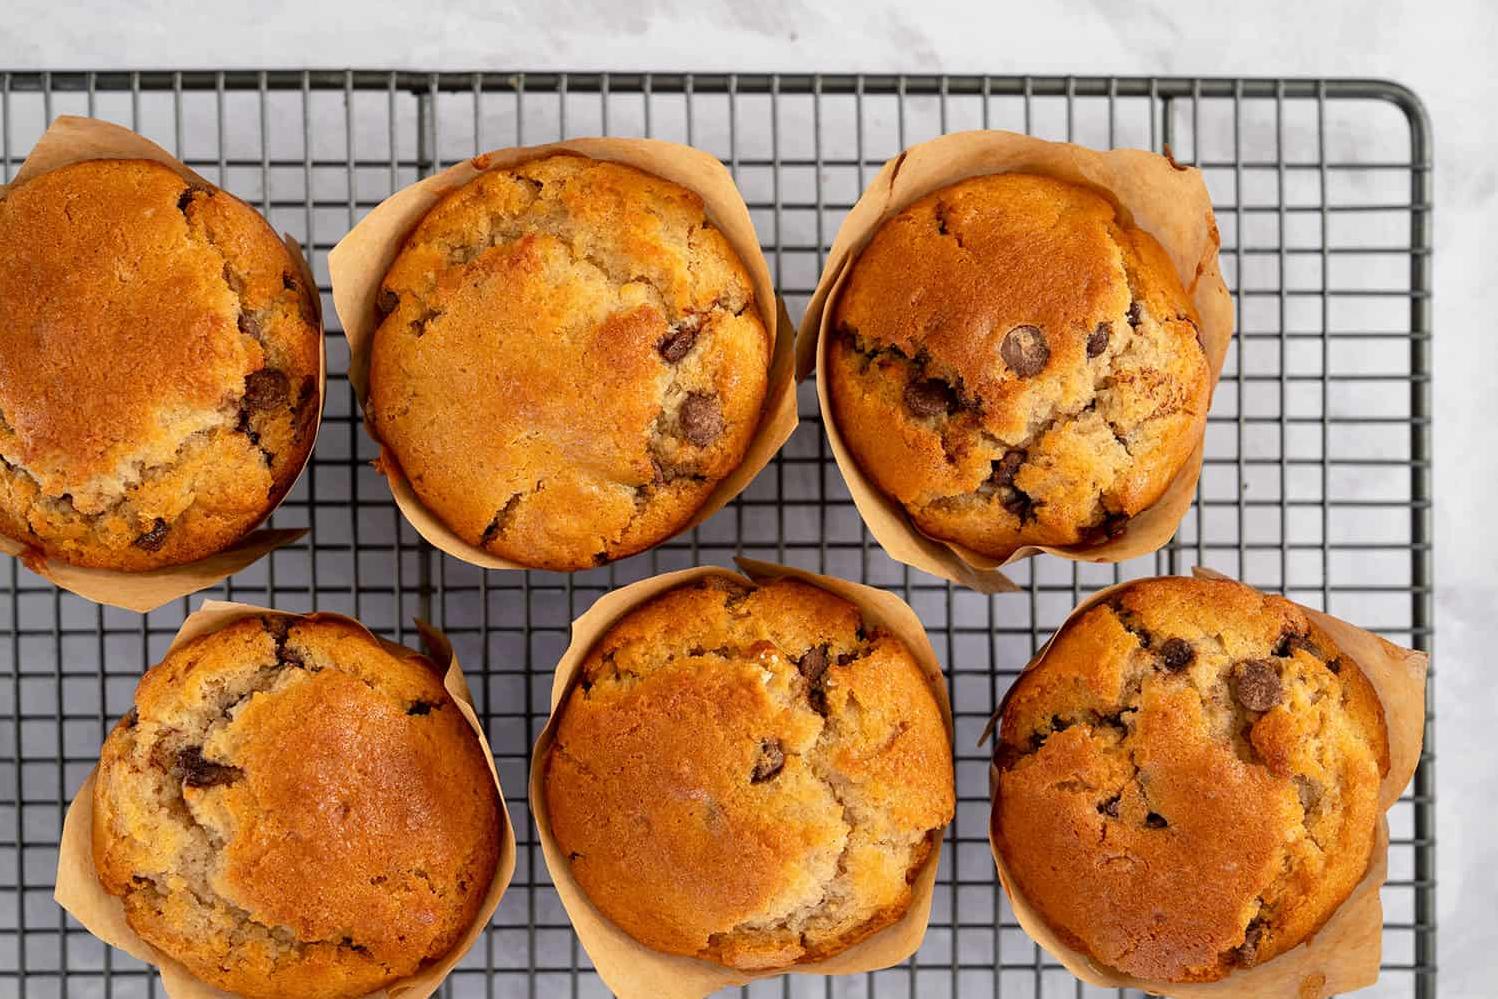  Satisfy your sweet tooth with these delicious gluten-free chocolate chip muffins that you won't be able to resist.